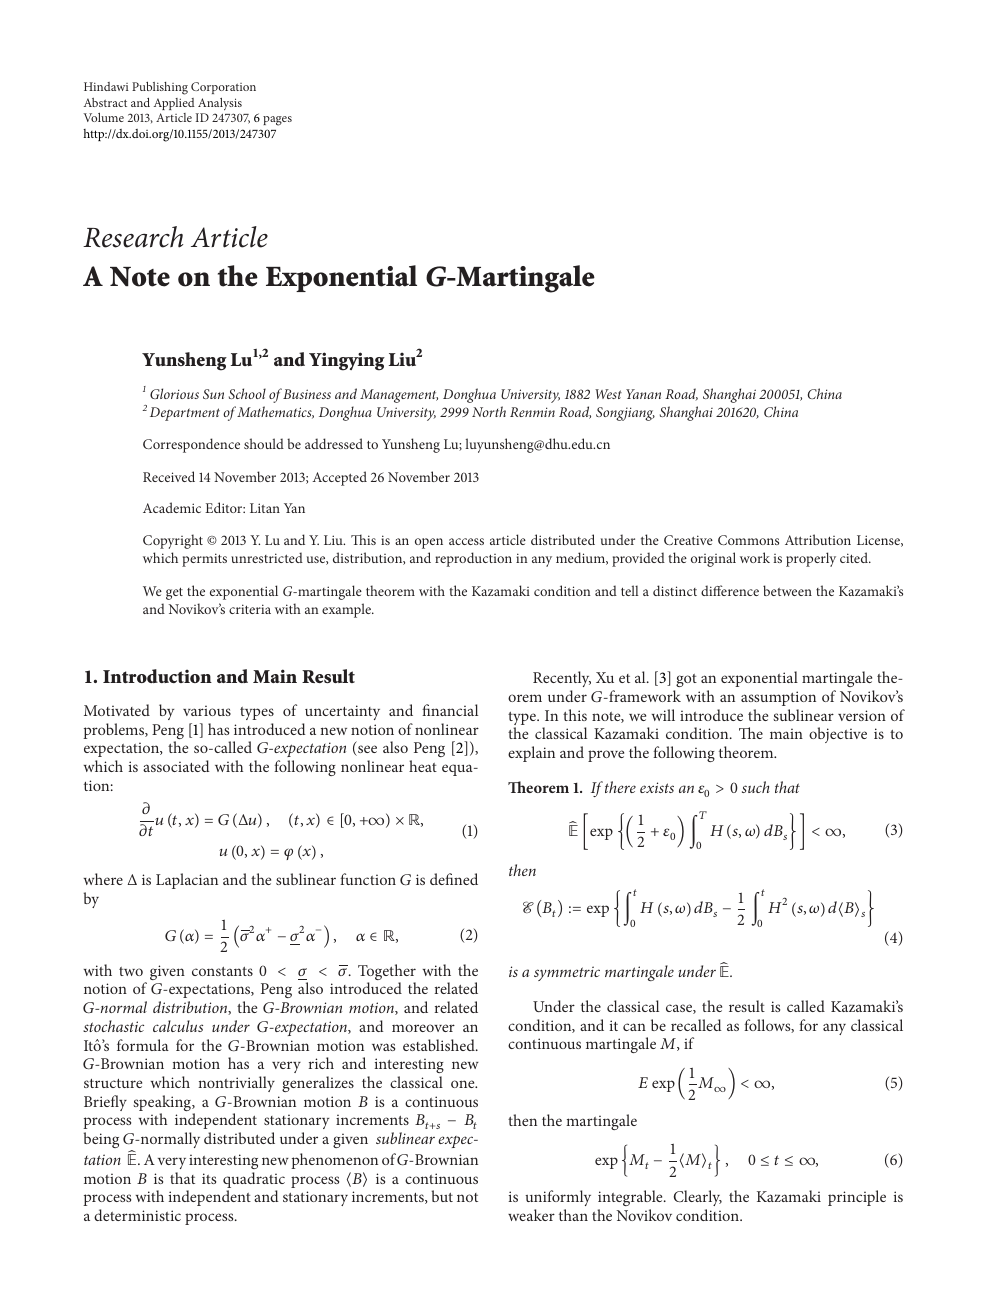 A Note On The Exponential G Martingale Topic Of Research Paper In Mathematics Download Scholarly Article Pdf And Read For Free On Cyberleninka Open Science Hub